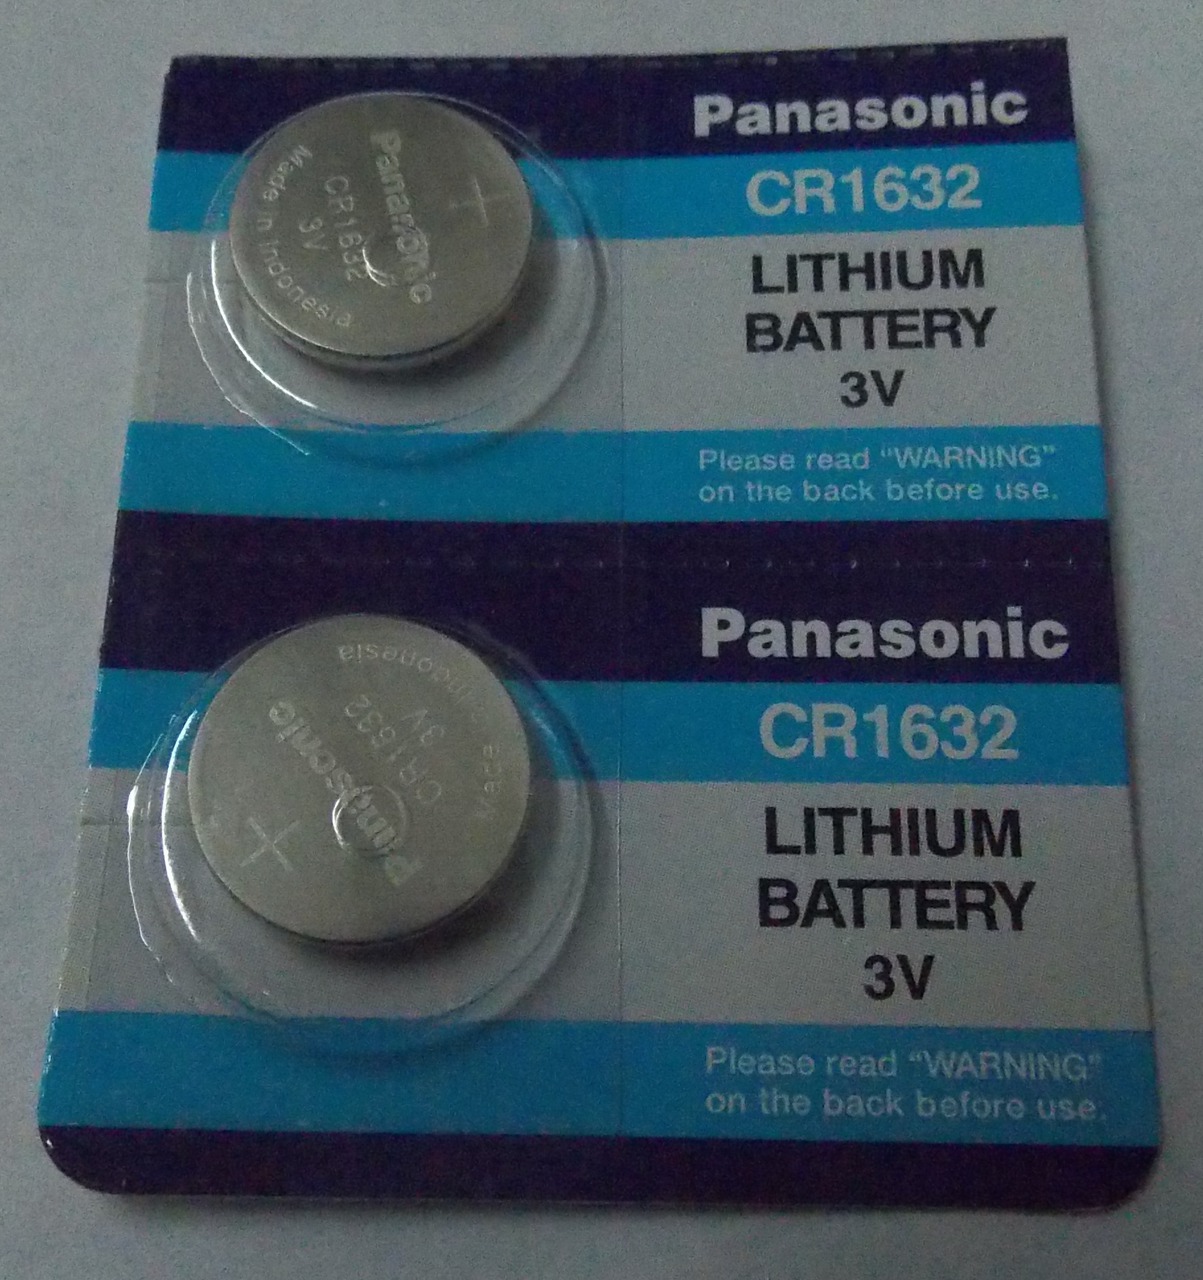 Panasonic CR1632 3V Lithium Coin Battery - 2 Pack + FREE SHIPPING!